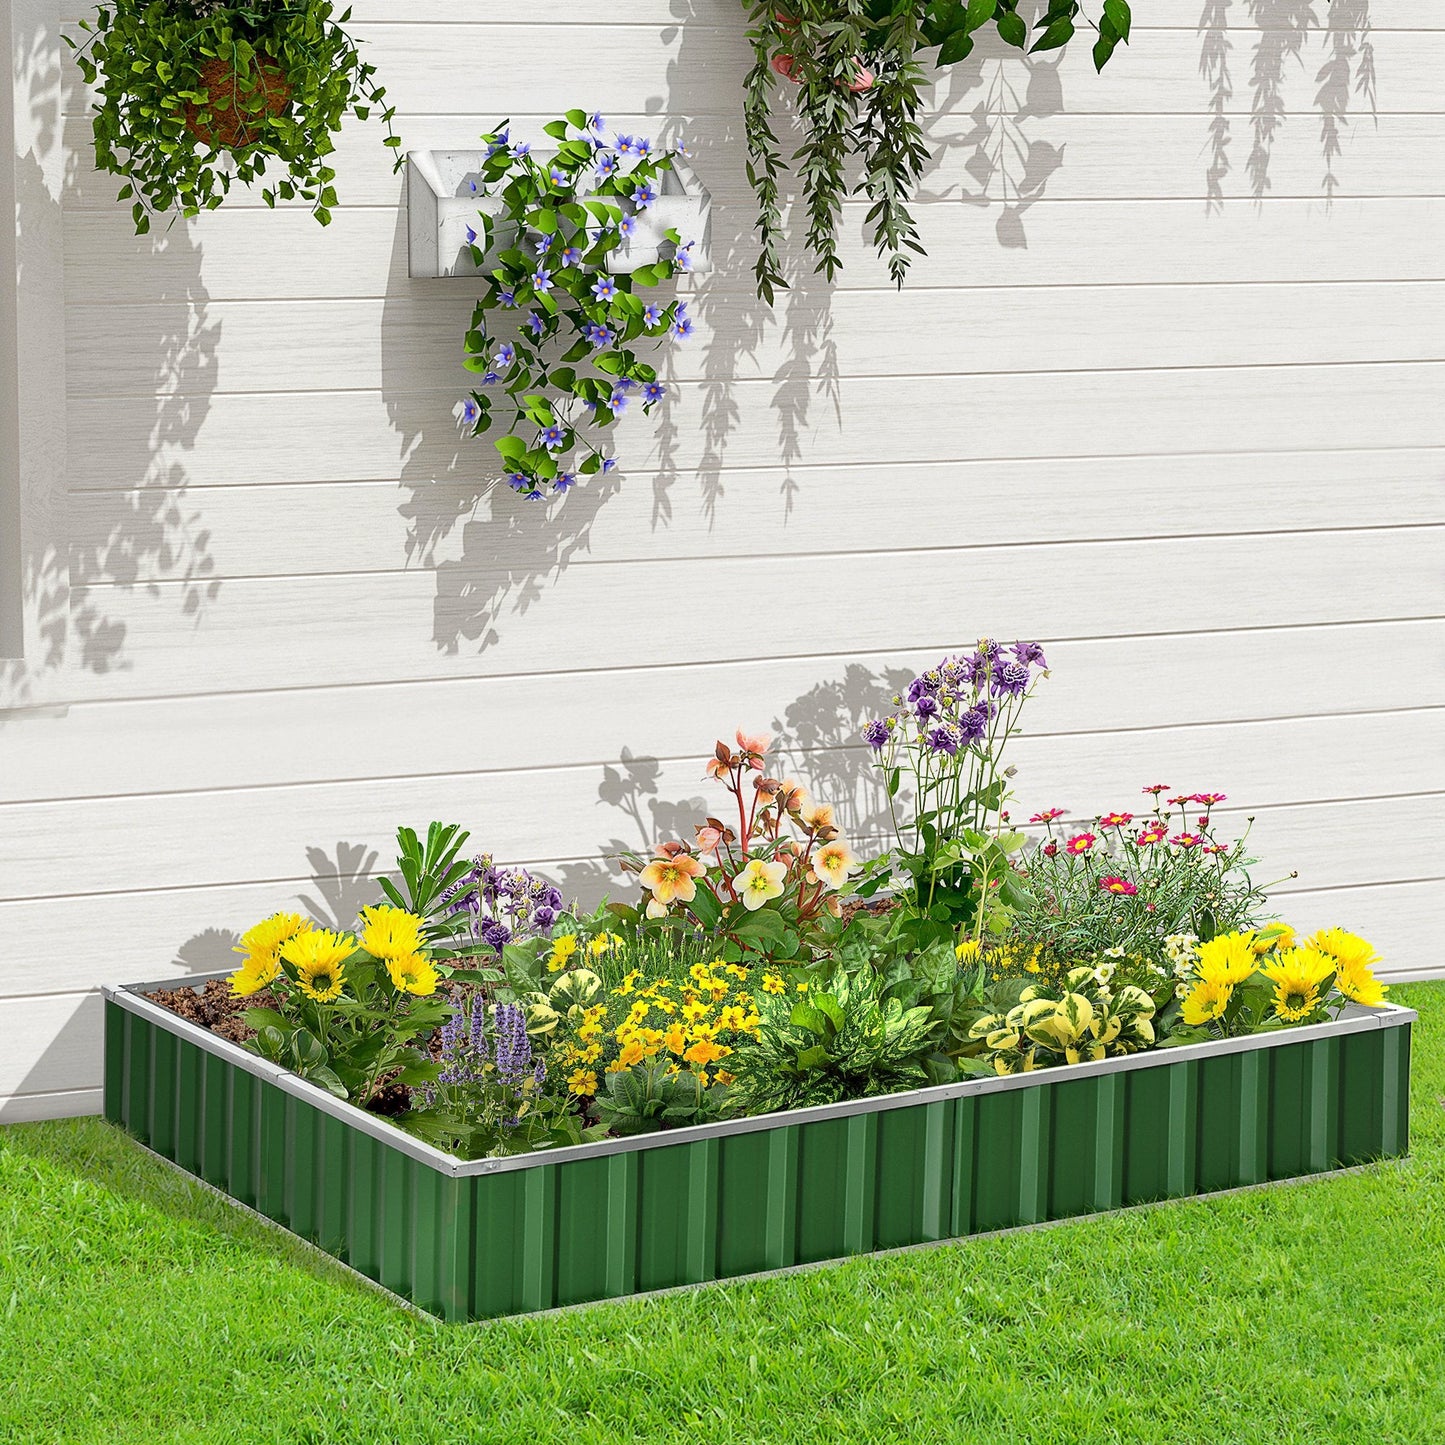 Outdoor and Garden-8.5x3ft Metal Raised Garden Bed, DIY Large Steel Planter Box, No Bottom w/ A Pairs of Glove for Backyard, Patio to Grow Vegetables, Green - Outdoor Style Company